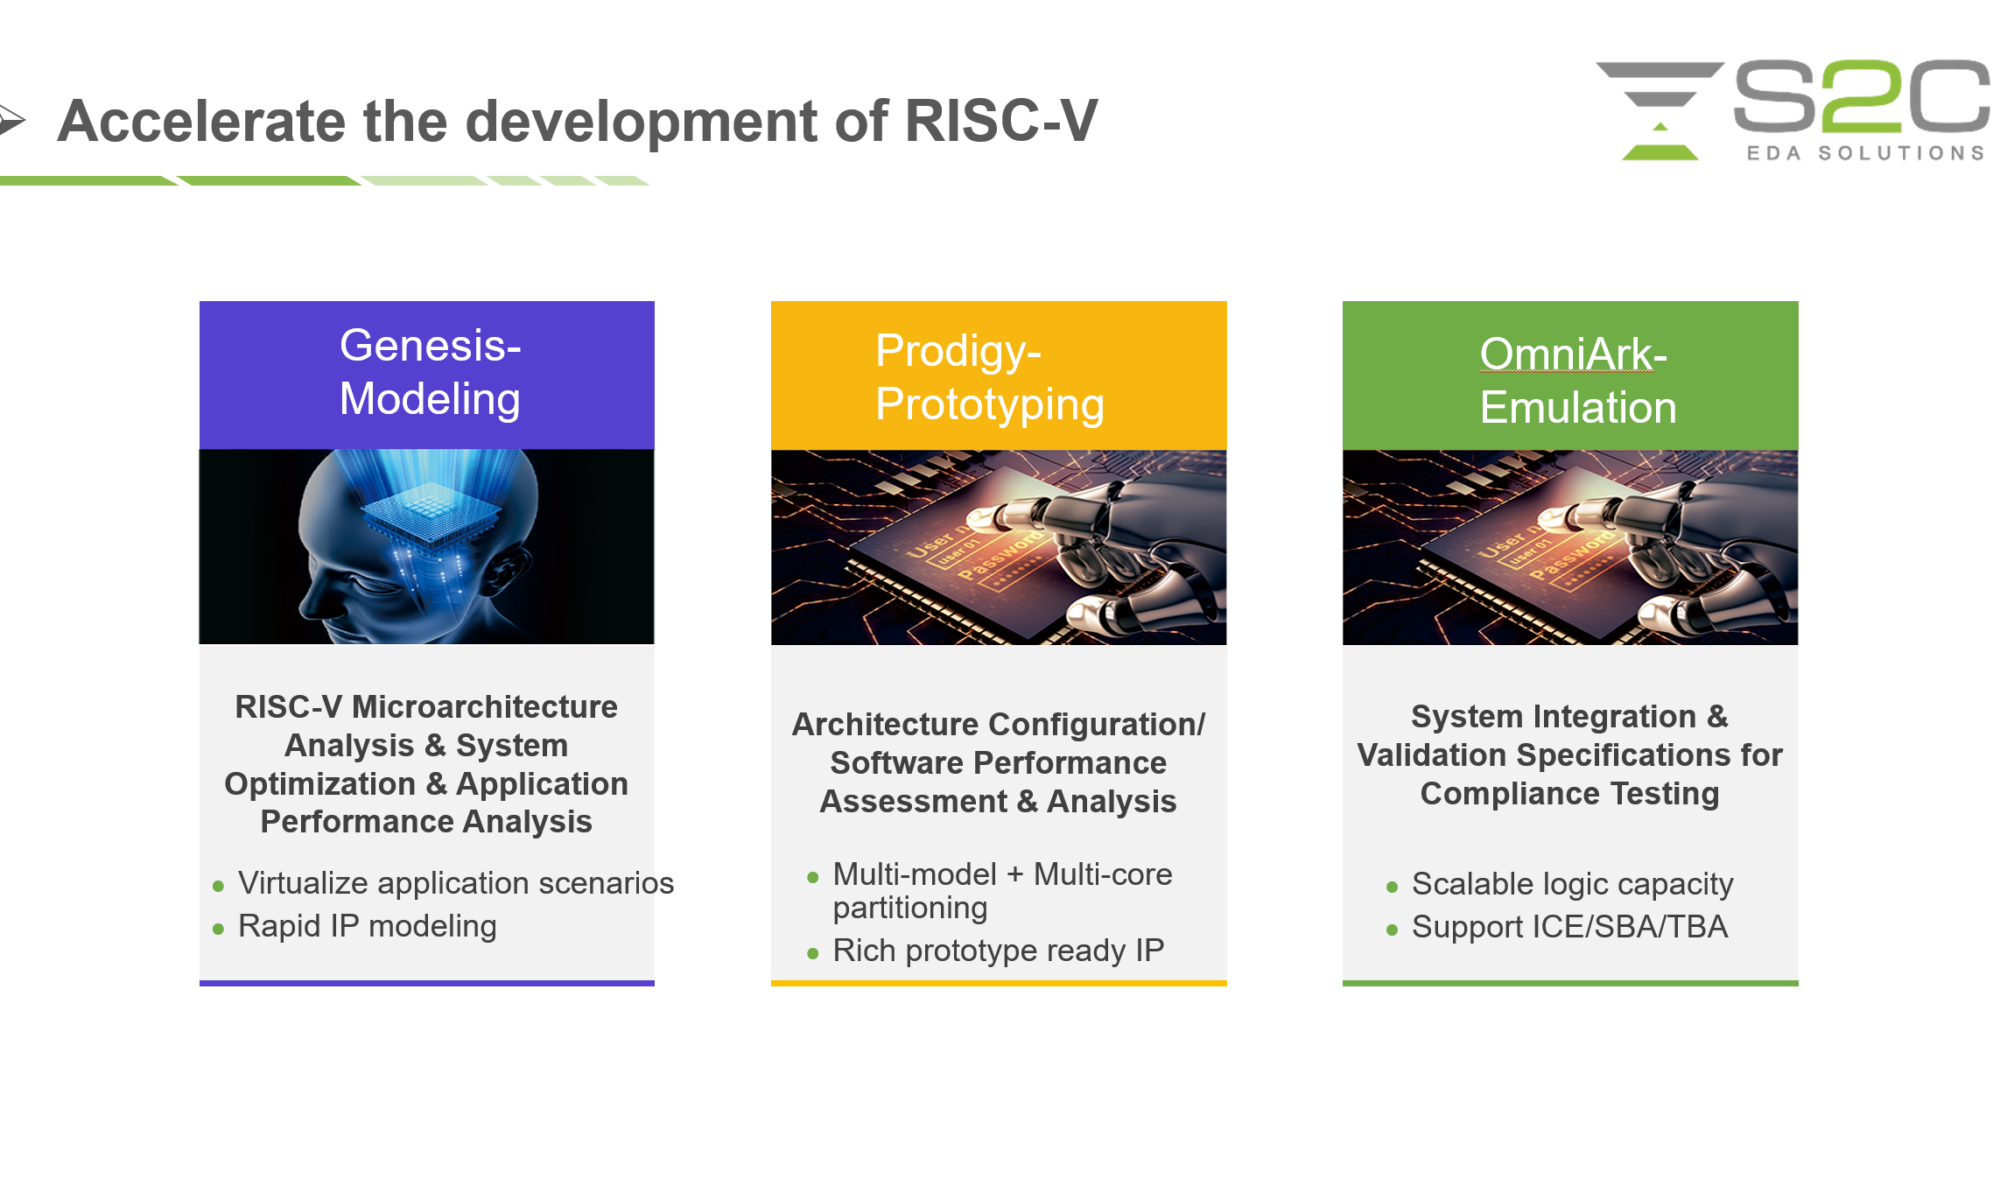 RISC V architecture analysis and optimization chain